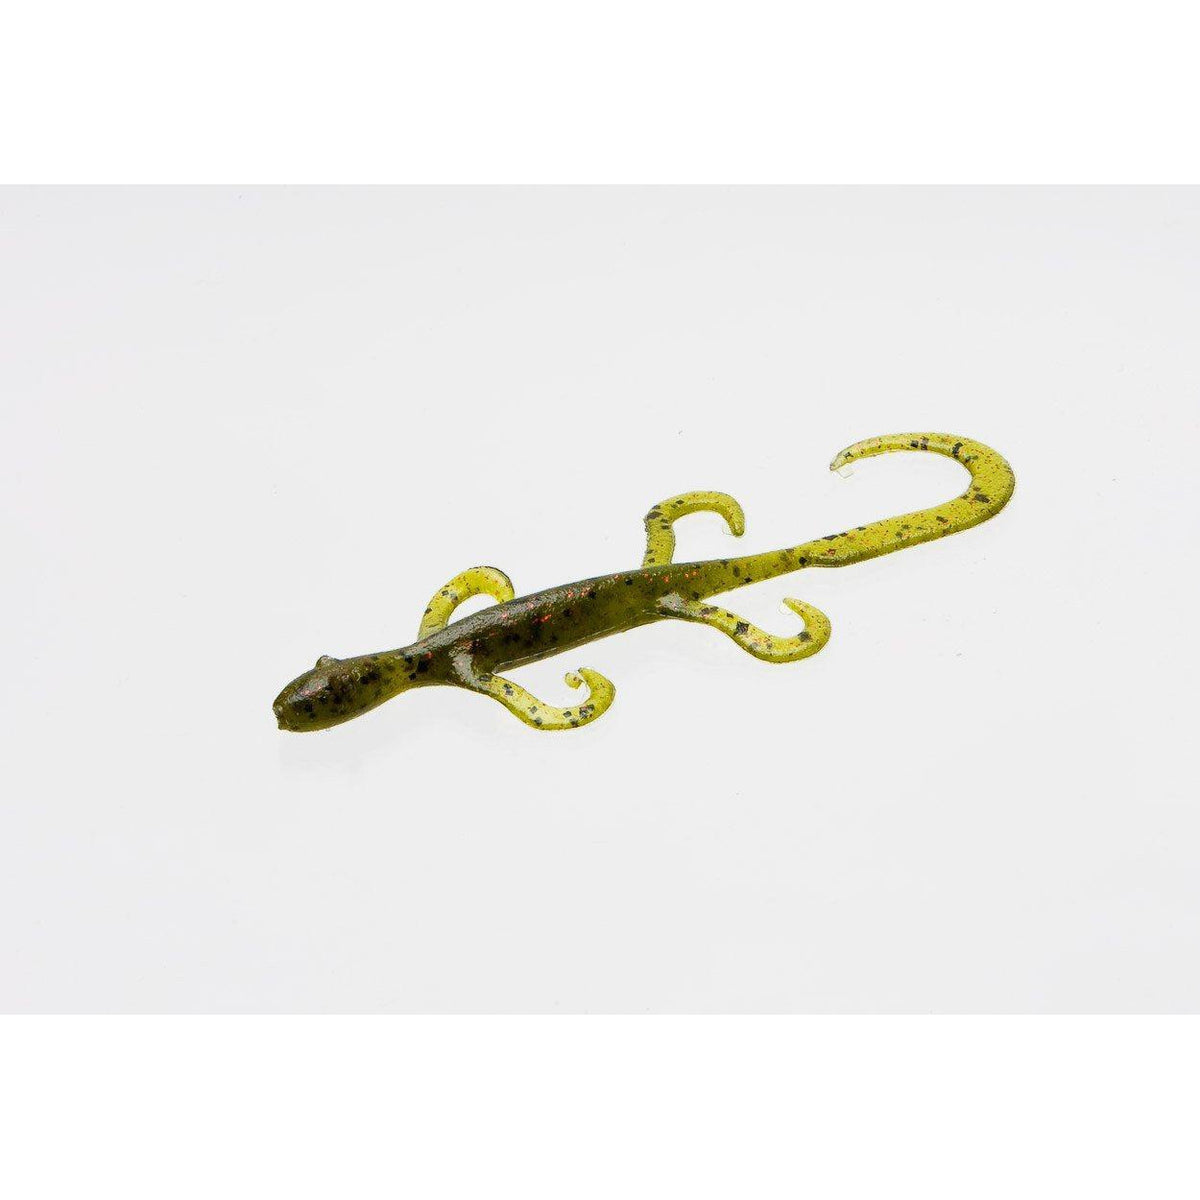 SPRO Phat Fly Jigs at Great Prices